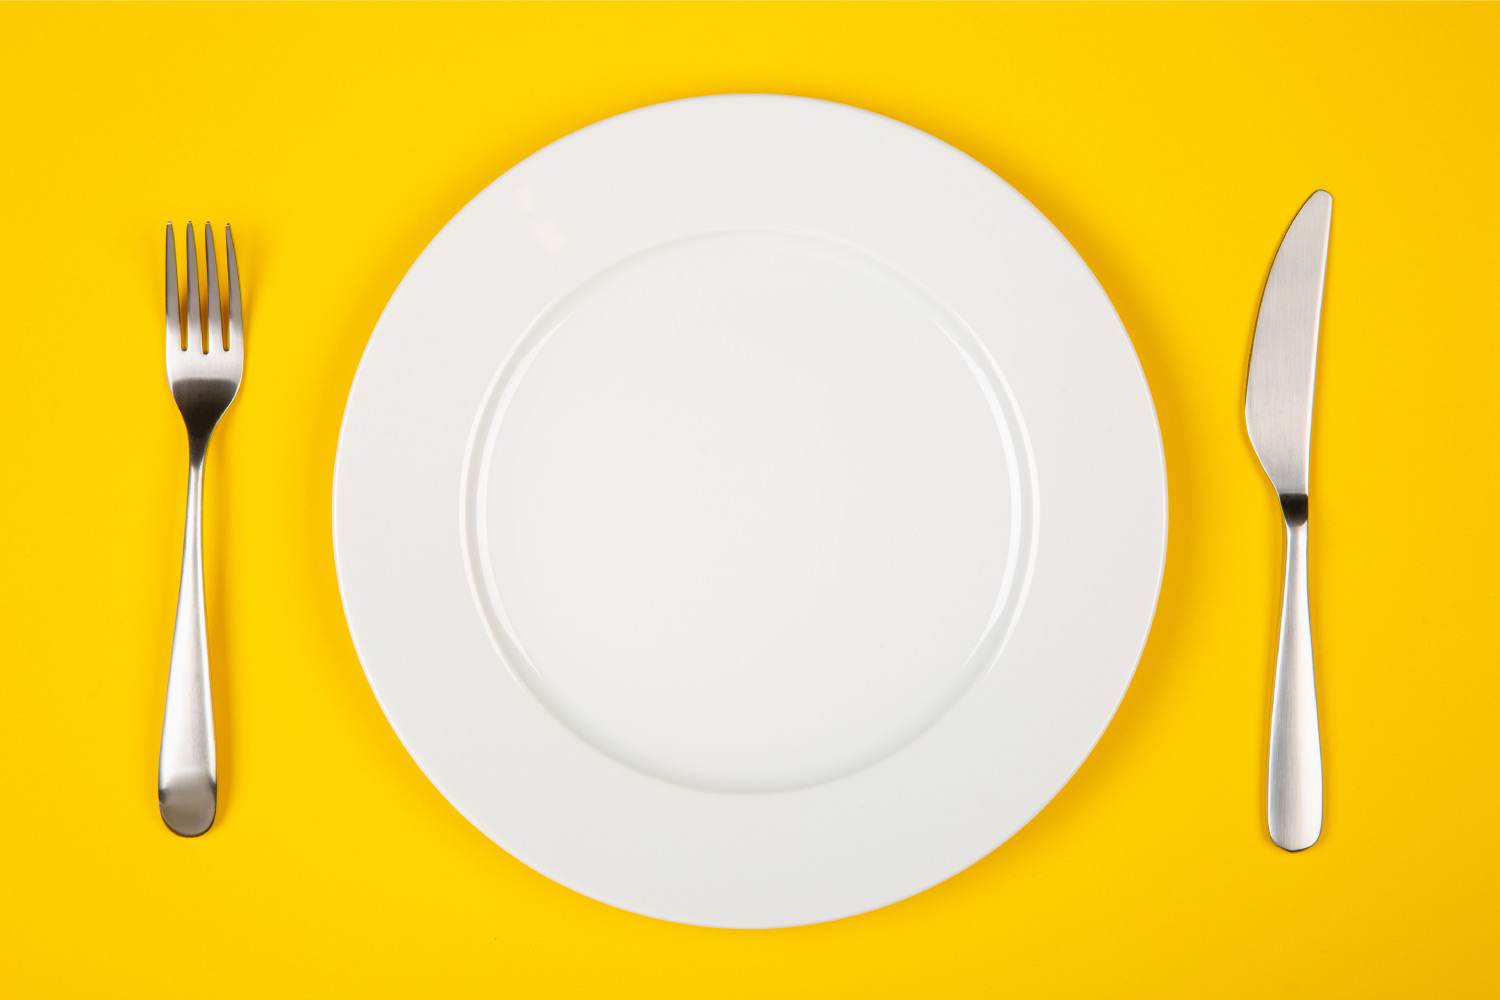 Aerial view of a white plate on a yellow table next to silverware